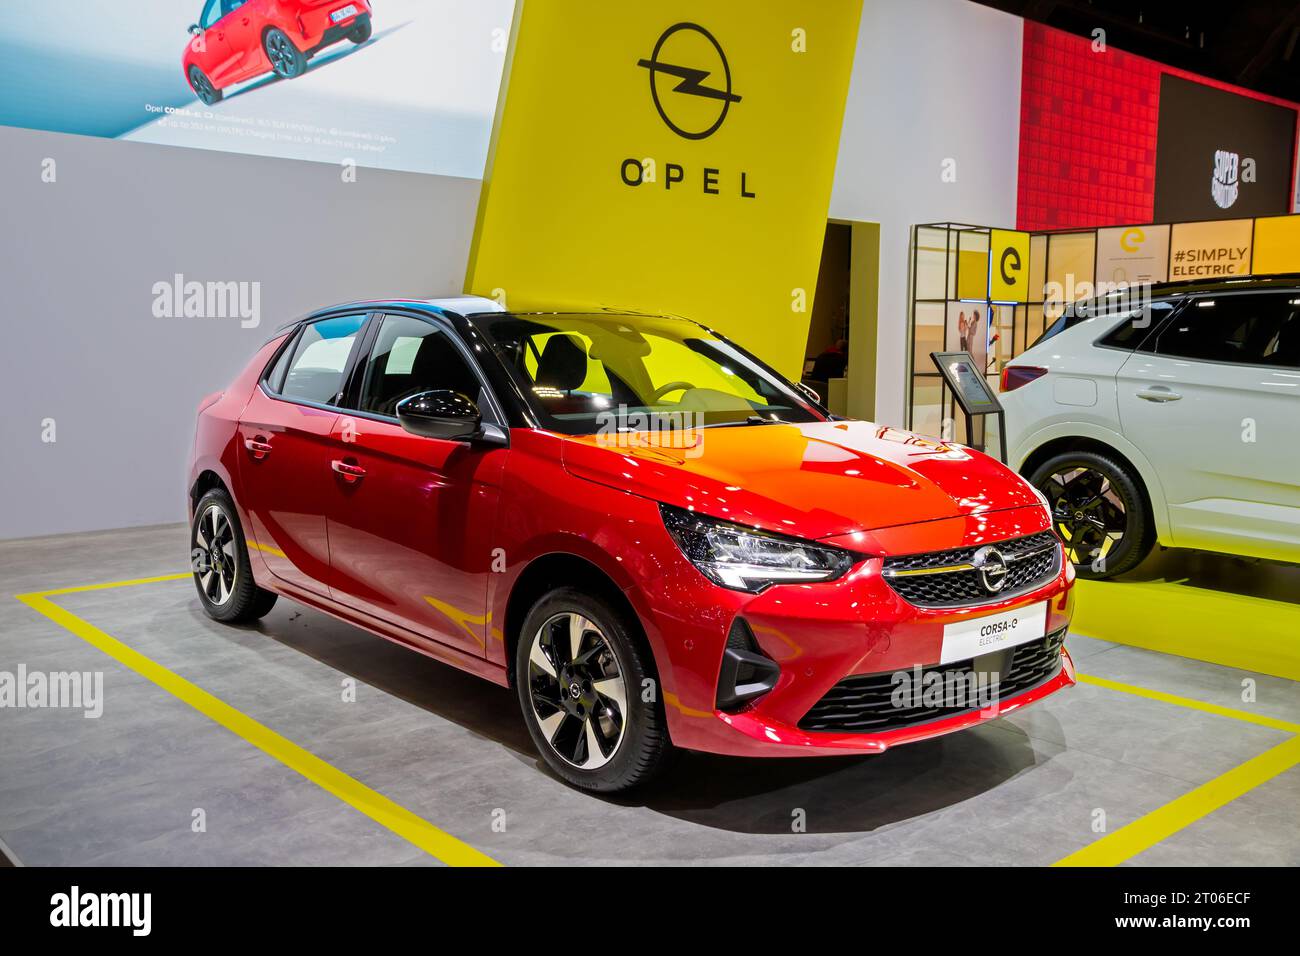 Opel Corsa-e (Vauxhall) electric hatchback car showcased at the Brussels Autosalon European Motor Show. Brussels, Belgium - January 13, 2023. Stock Photo